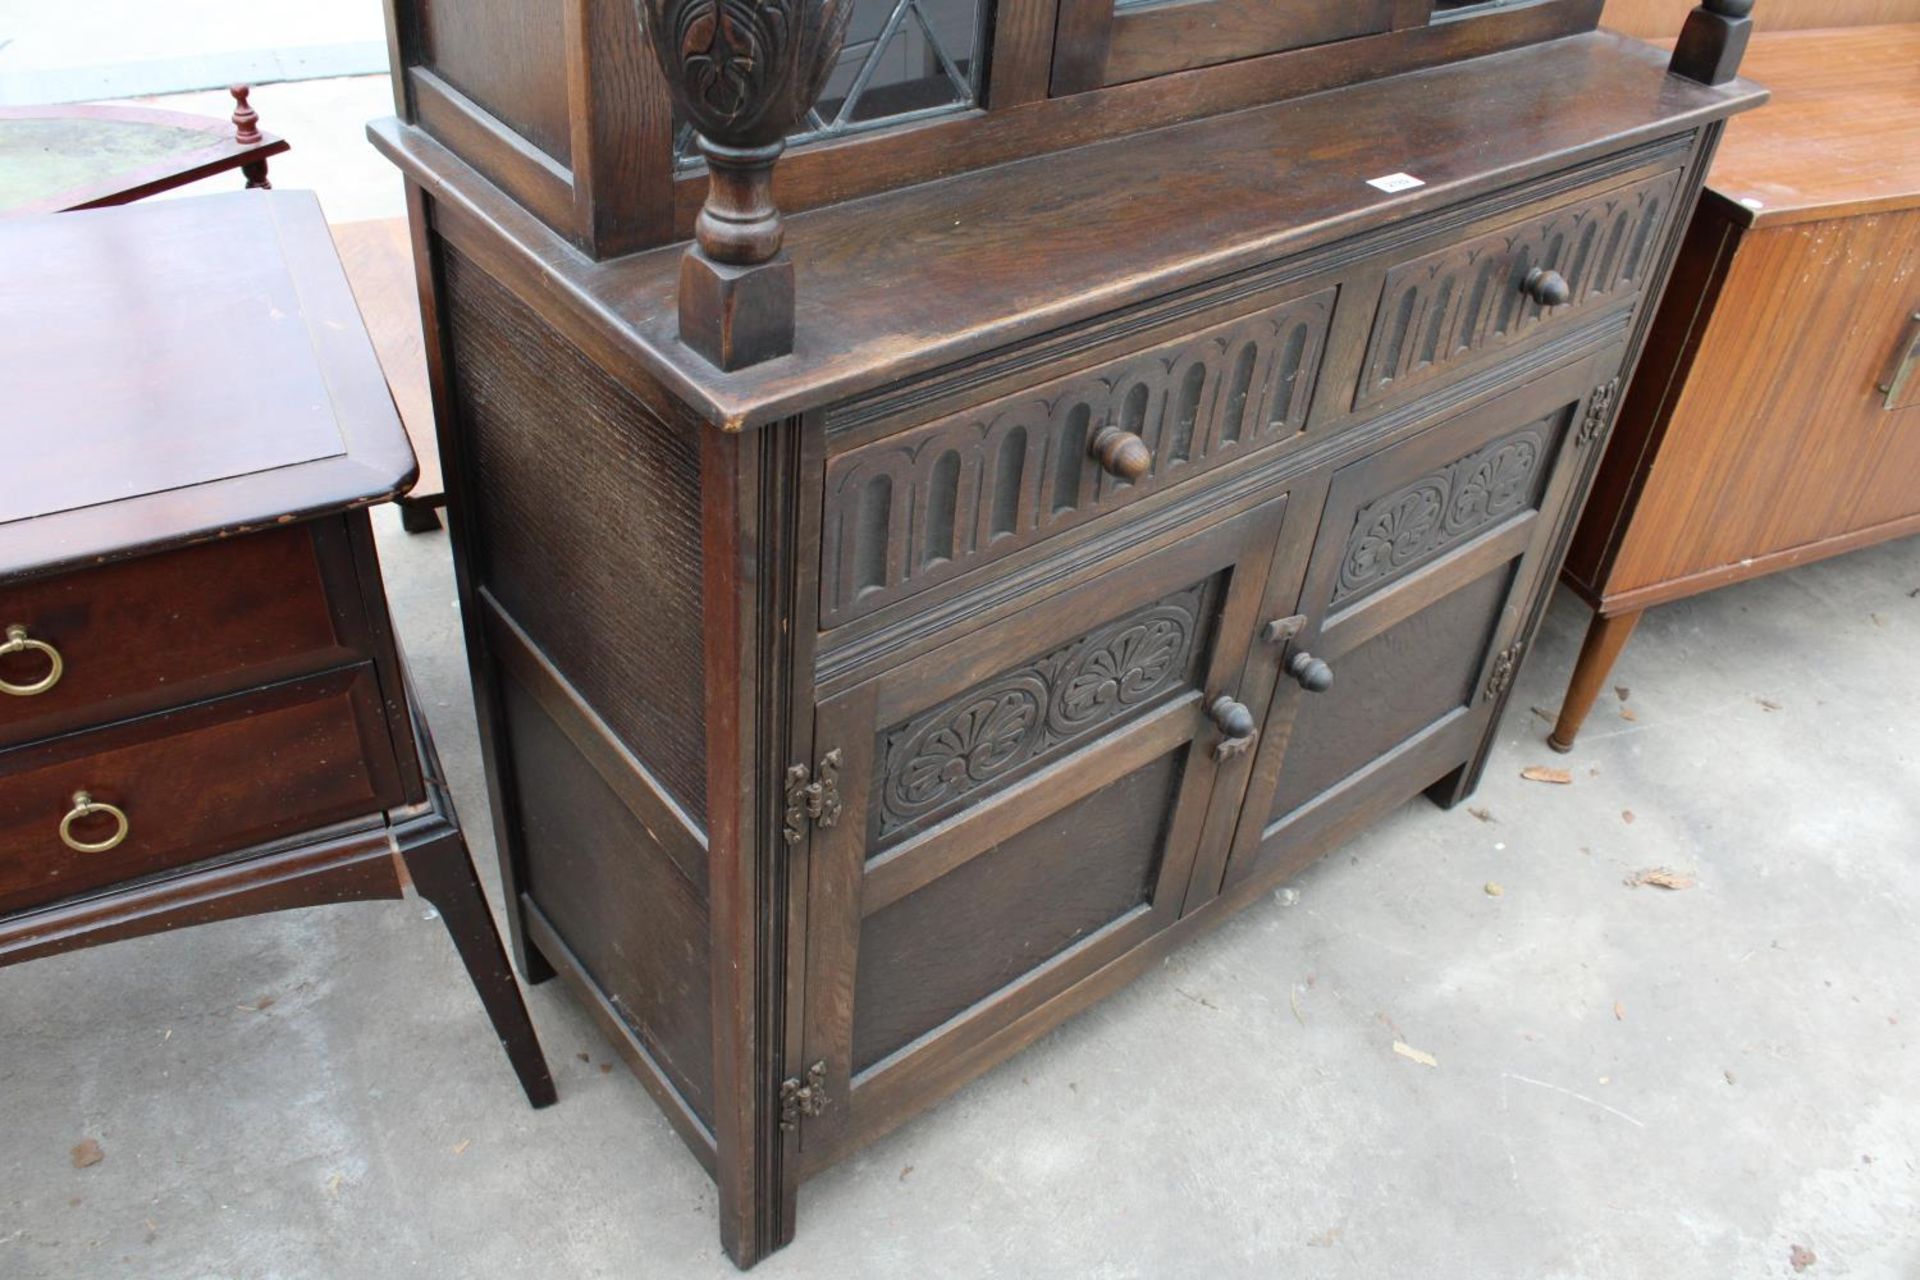 AN OAK JACOBEAN STYLE COURT CUPBOARD WITH GLAZED AND LEADED UPPER PORTION, 54" WIDE - Image 3 of 6